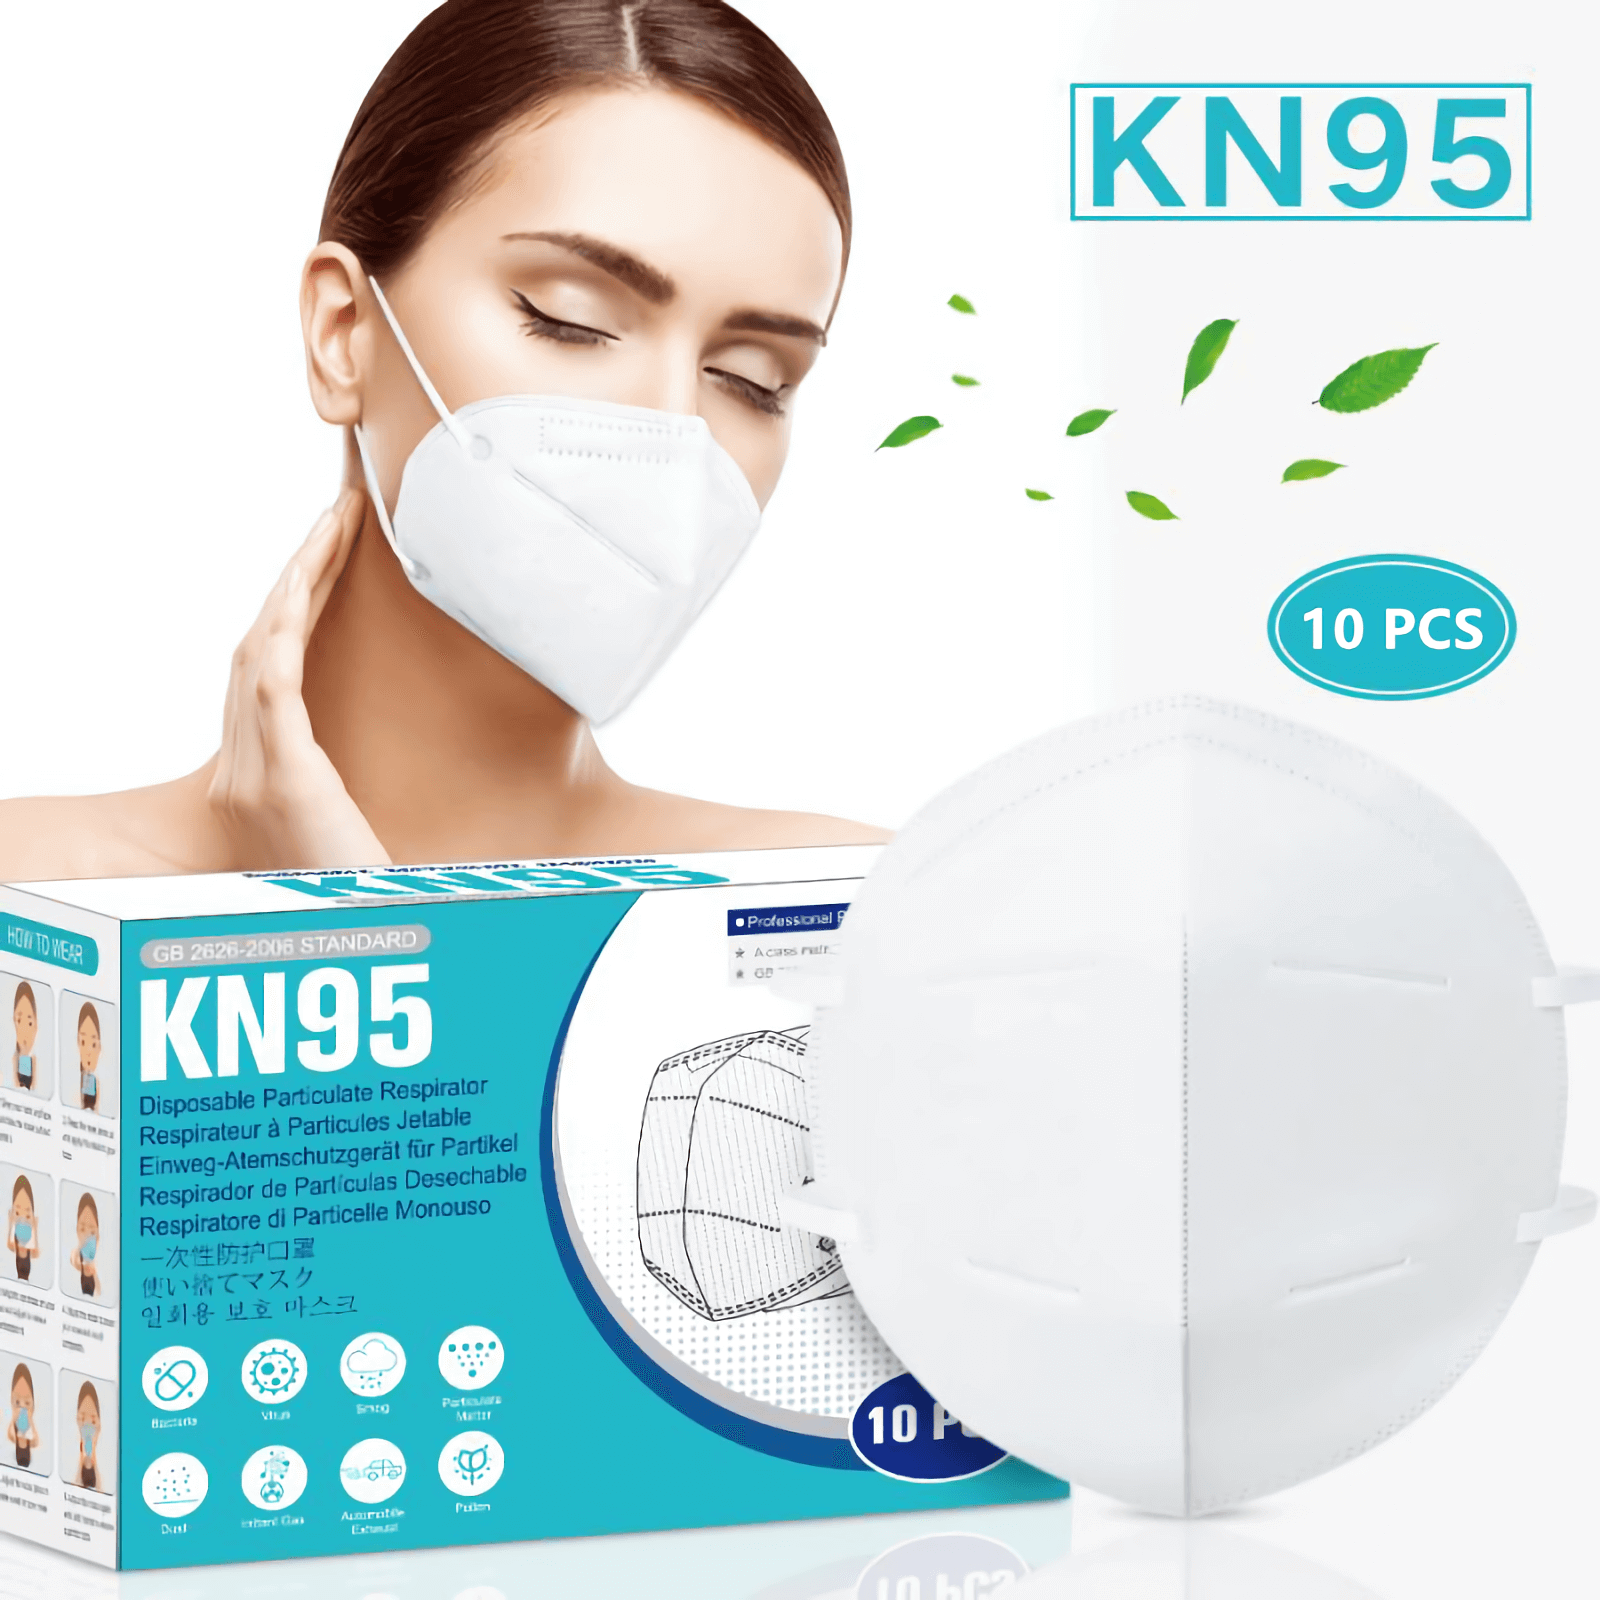 MYH Technology Co.,Ltd Introduces High-end Protective N95 and Sugical Face Masks for Coronavirus